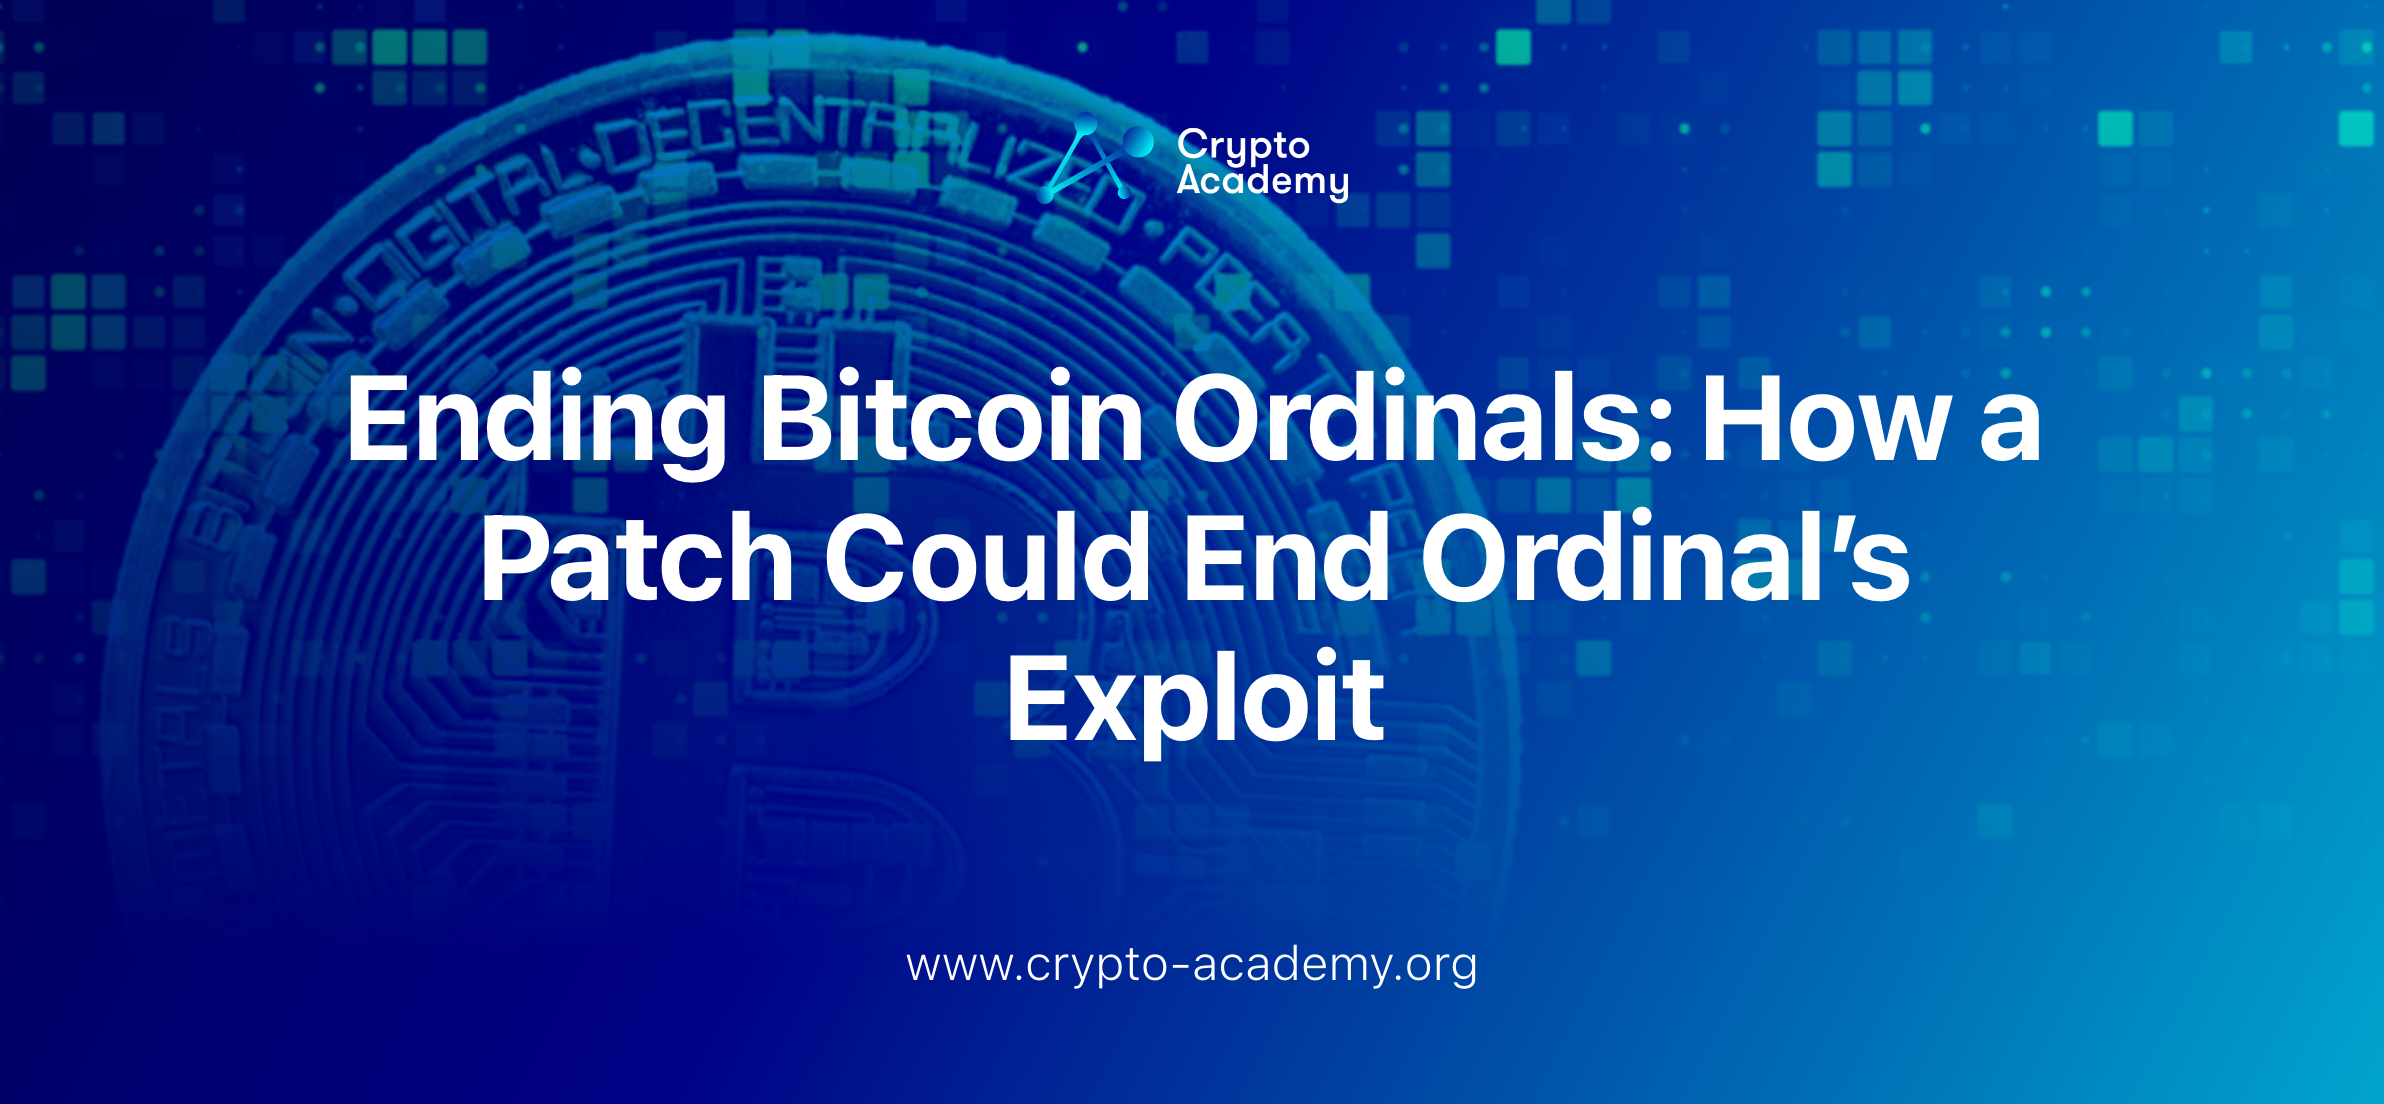 Ending Bitcoin Ordinals: How a Patch Could End Ordinal’s Exploit